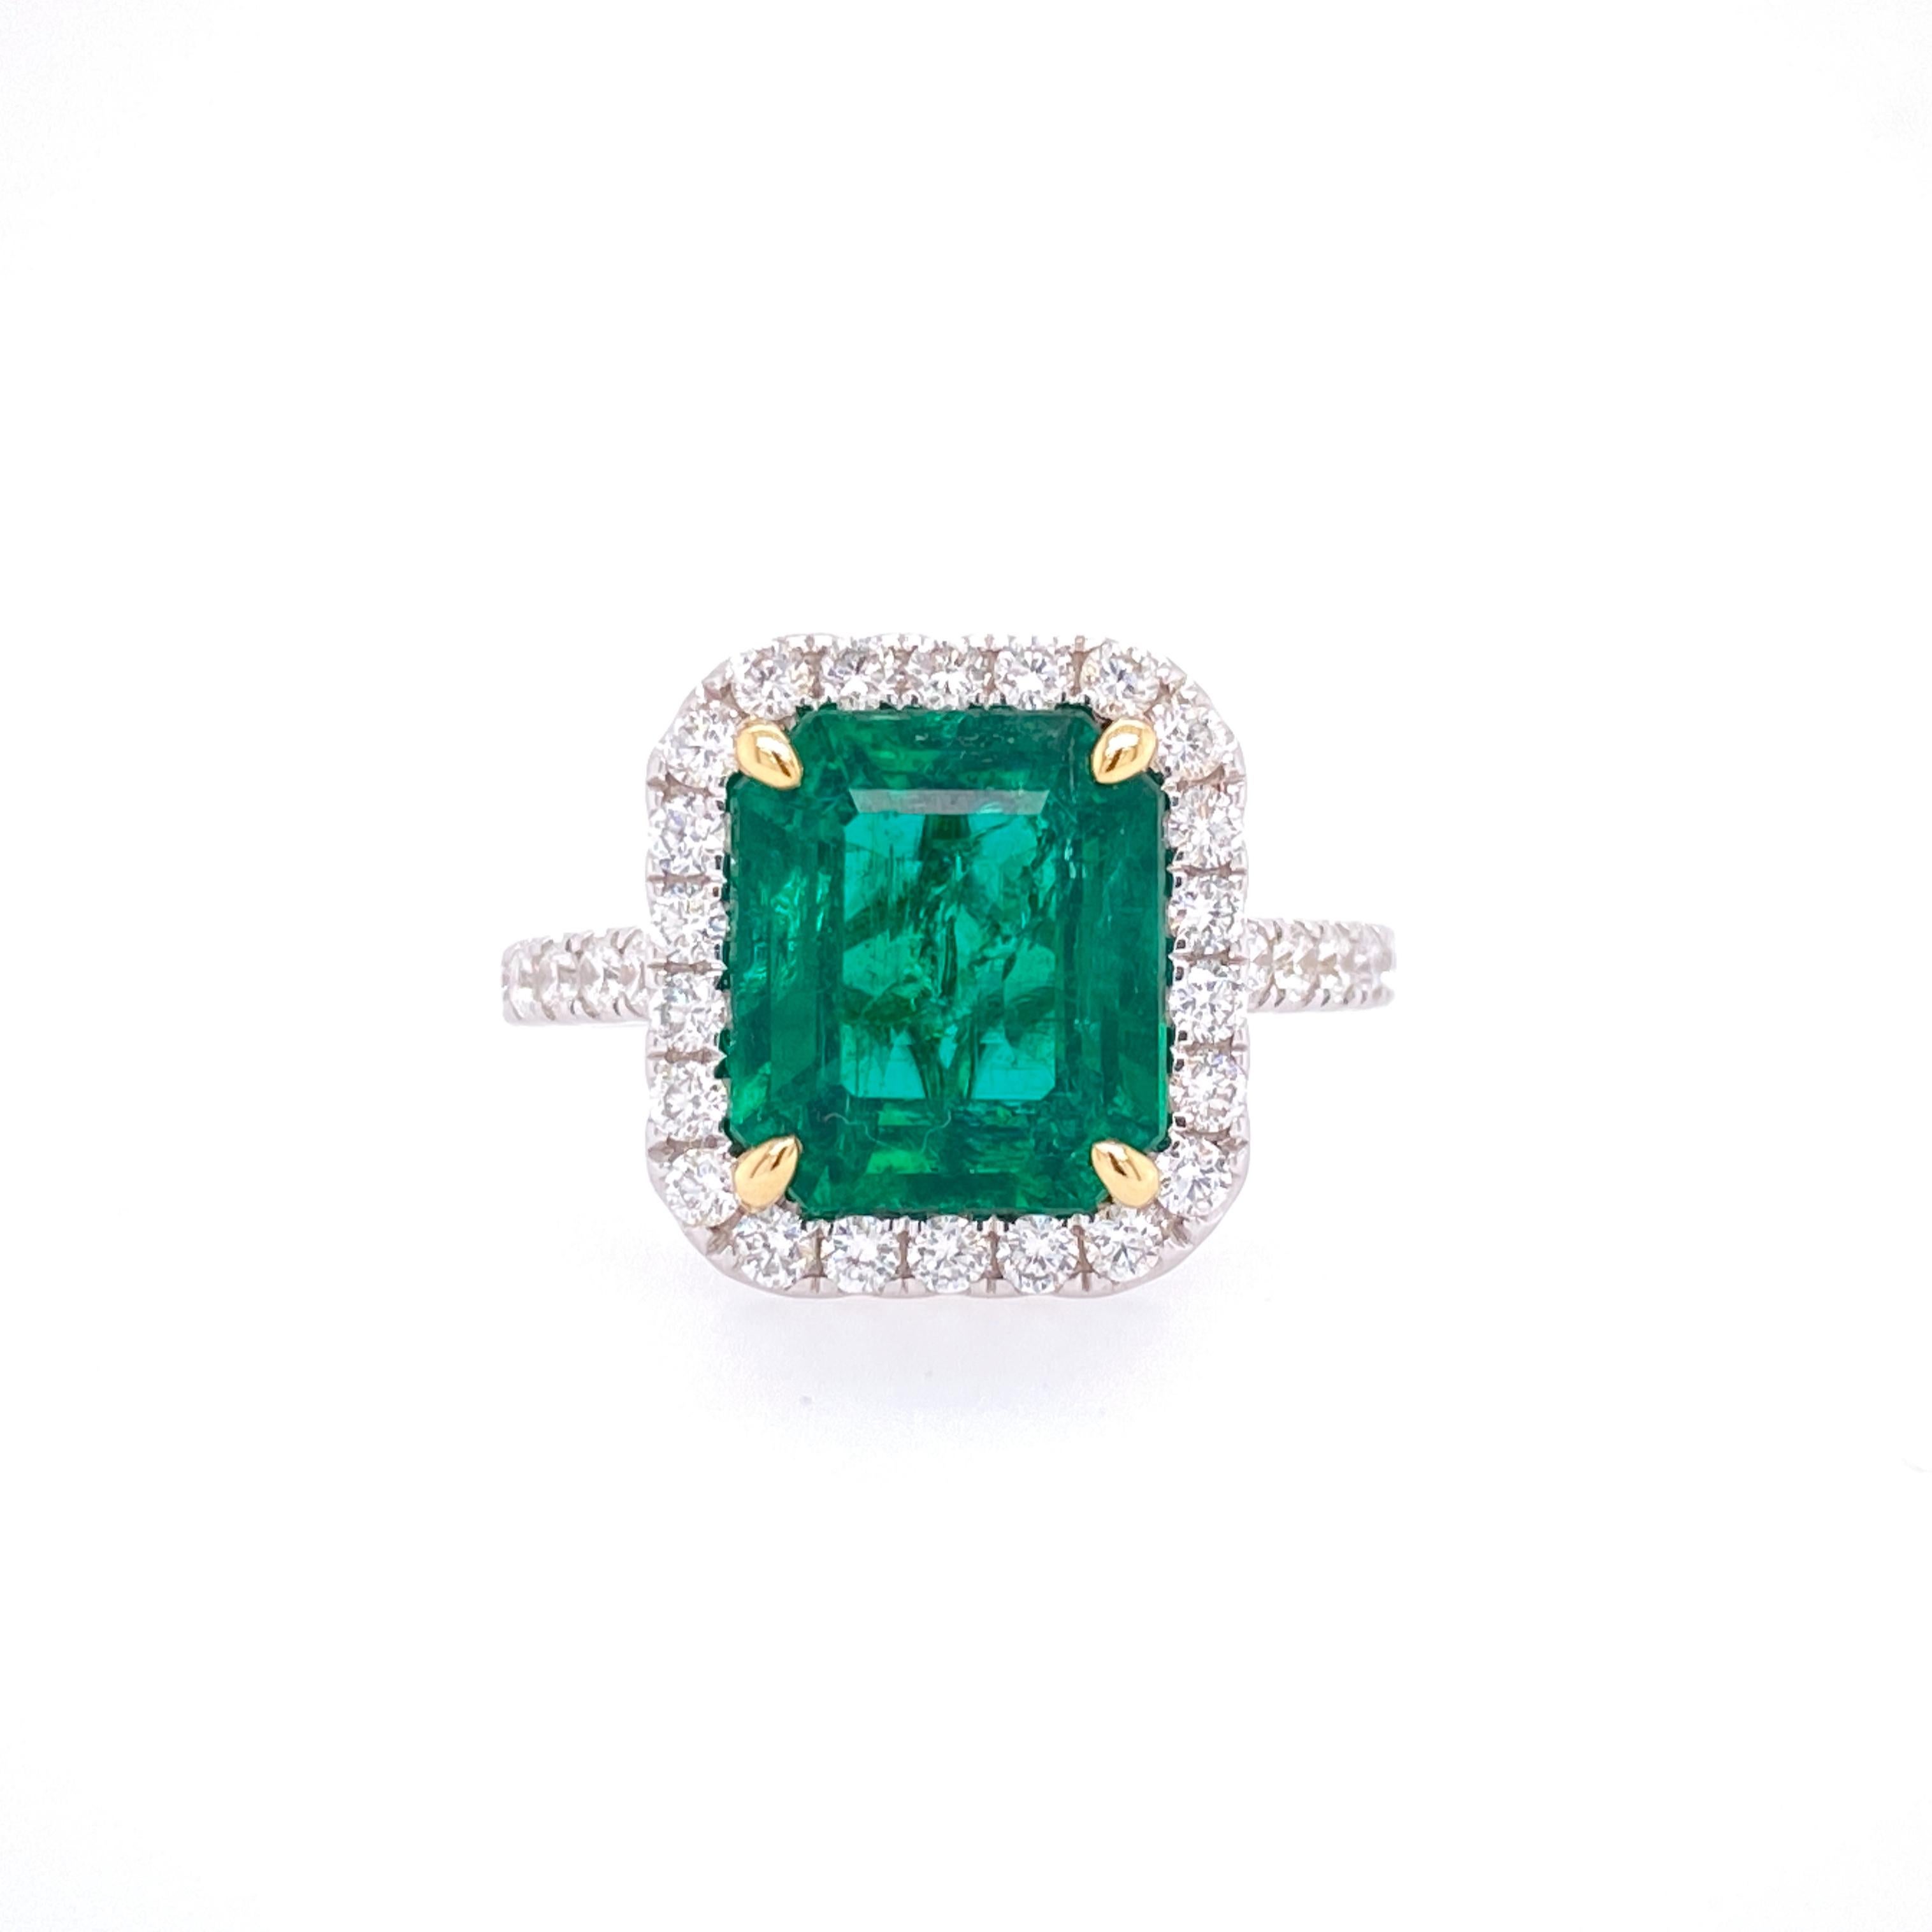 This stunning Cocktail Ring features a beautiful GIA Certified 3.80 Carat Emerald Cut Emerald with a Diamond Halo, that sits on a Diamond Shank. This Ring is set in 18K White Gold, with 18K Yellow Gold prongs on the center stone. 
Total Diamond